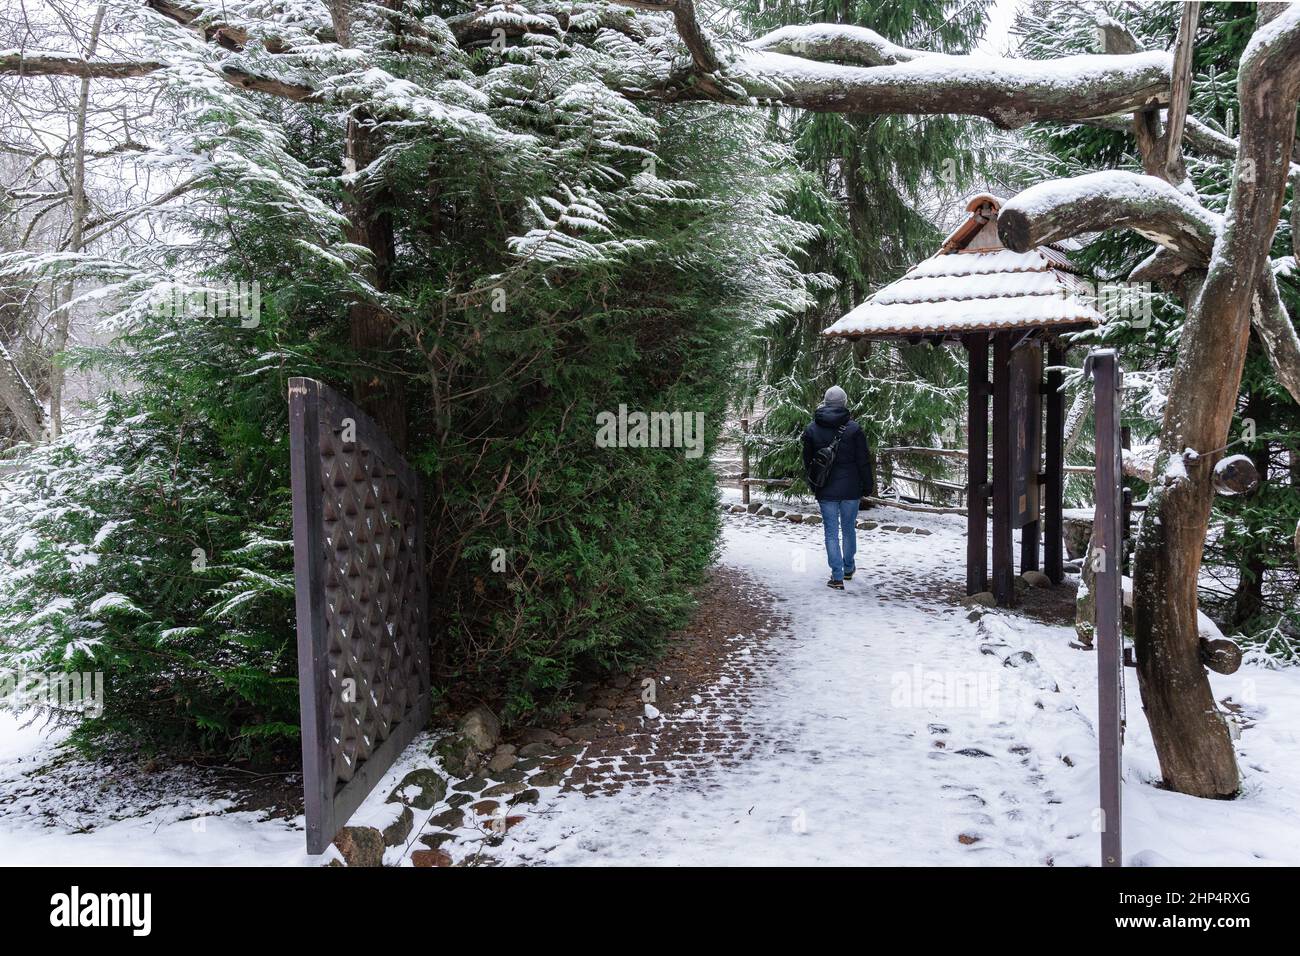 A man walks along a path in a park in winter, rear view. Stock Photo